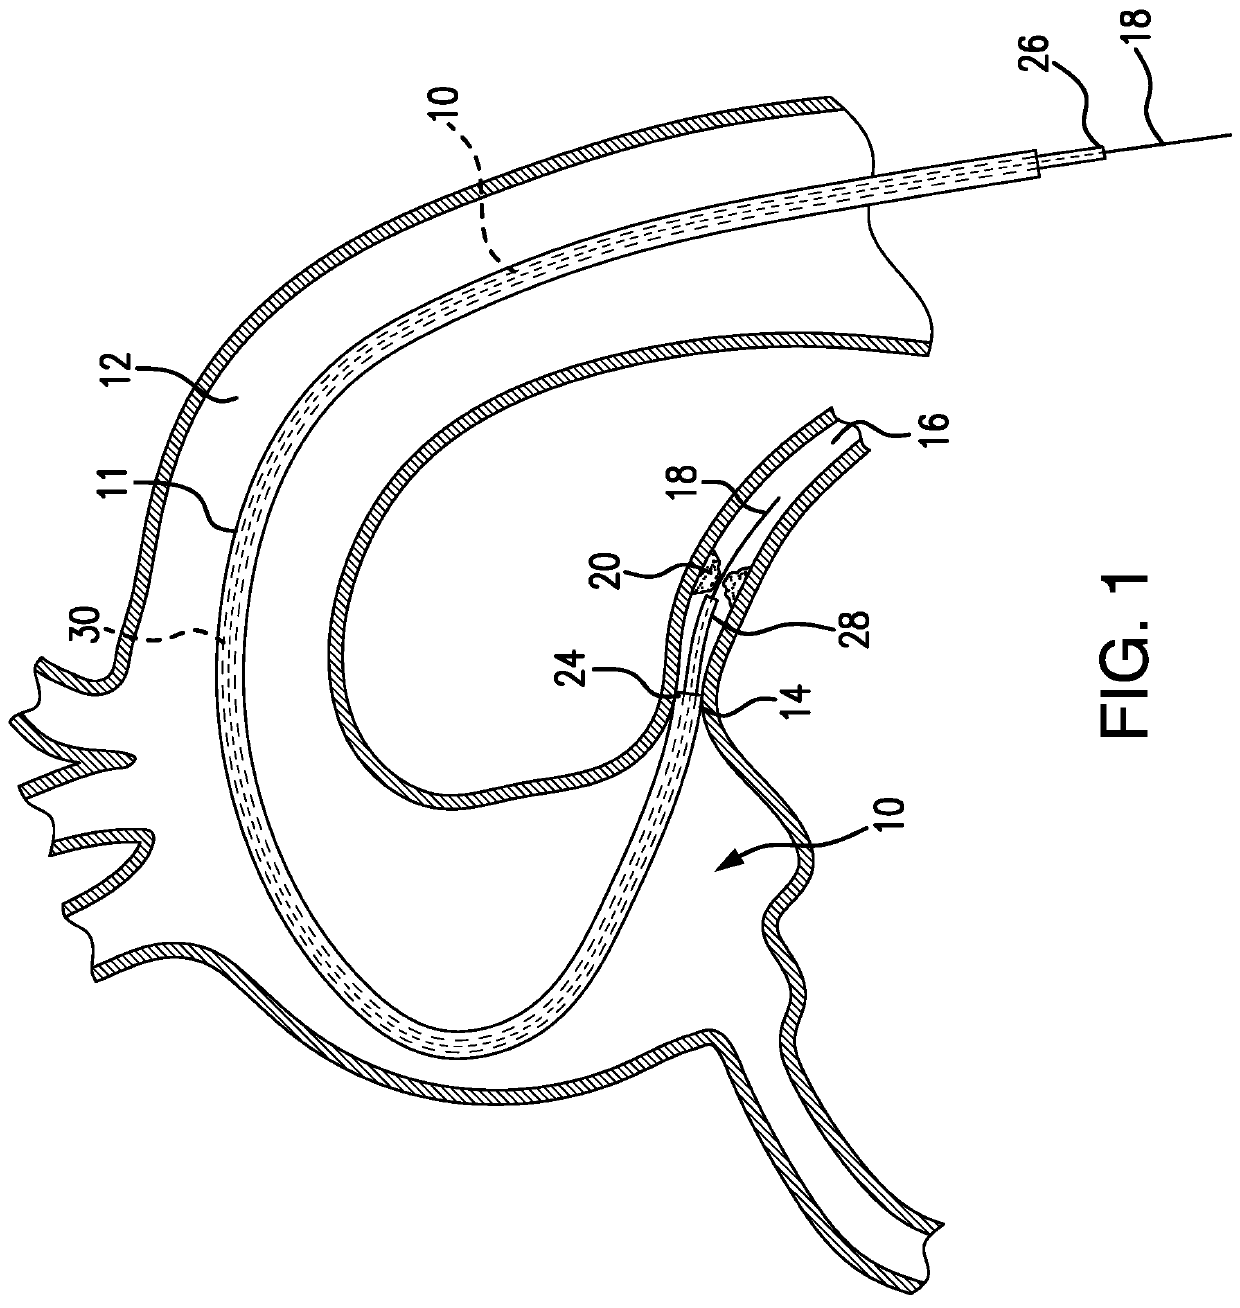 Guide catheter extension system with a delivery micro-catheter configured to facilitate percutaneous coronary intervention